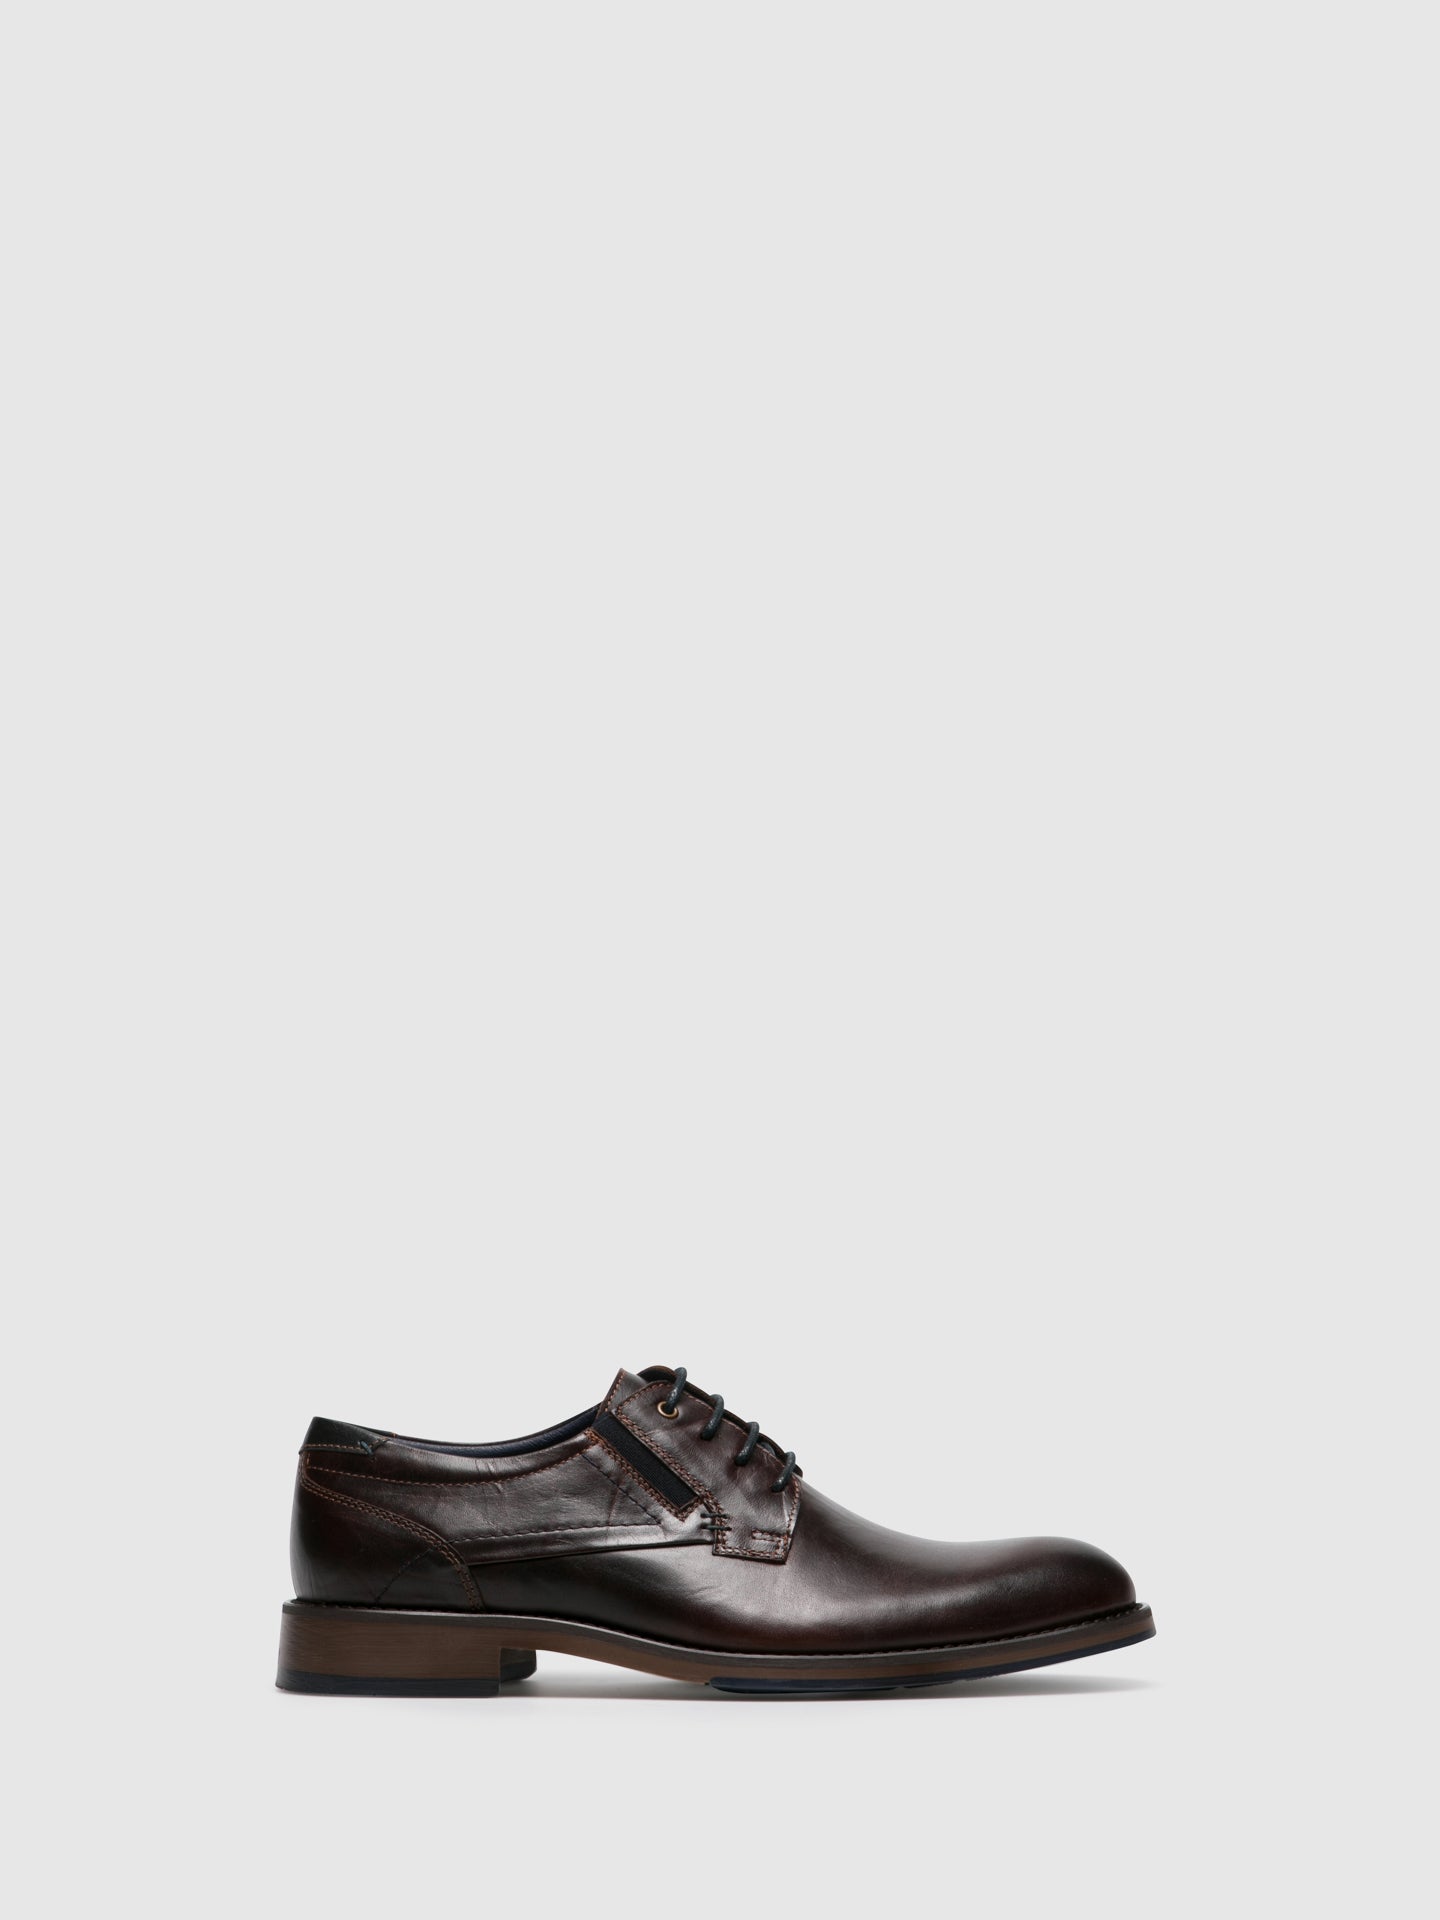 Foreva Chocolate Lace-up Shoes